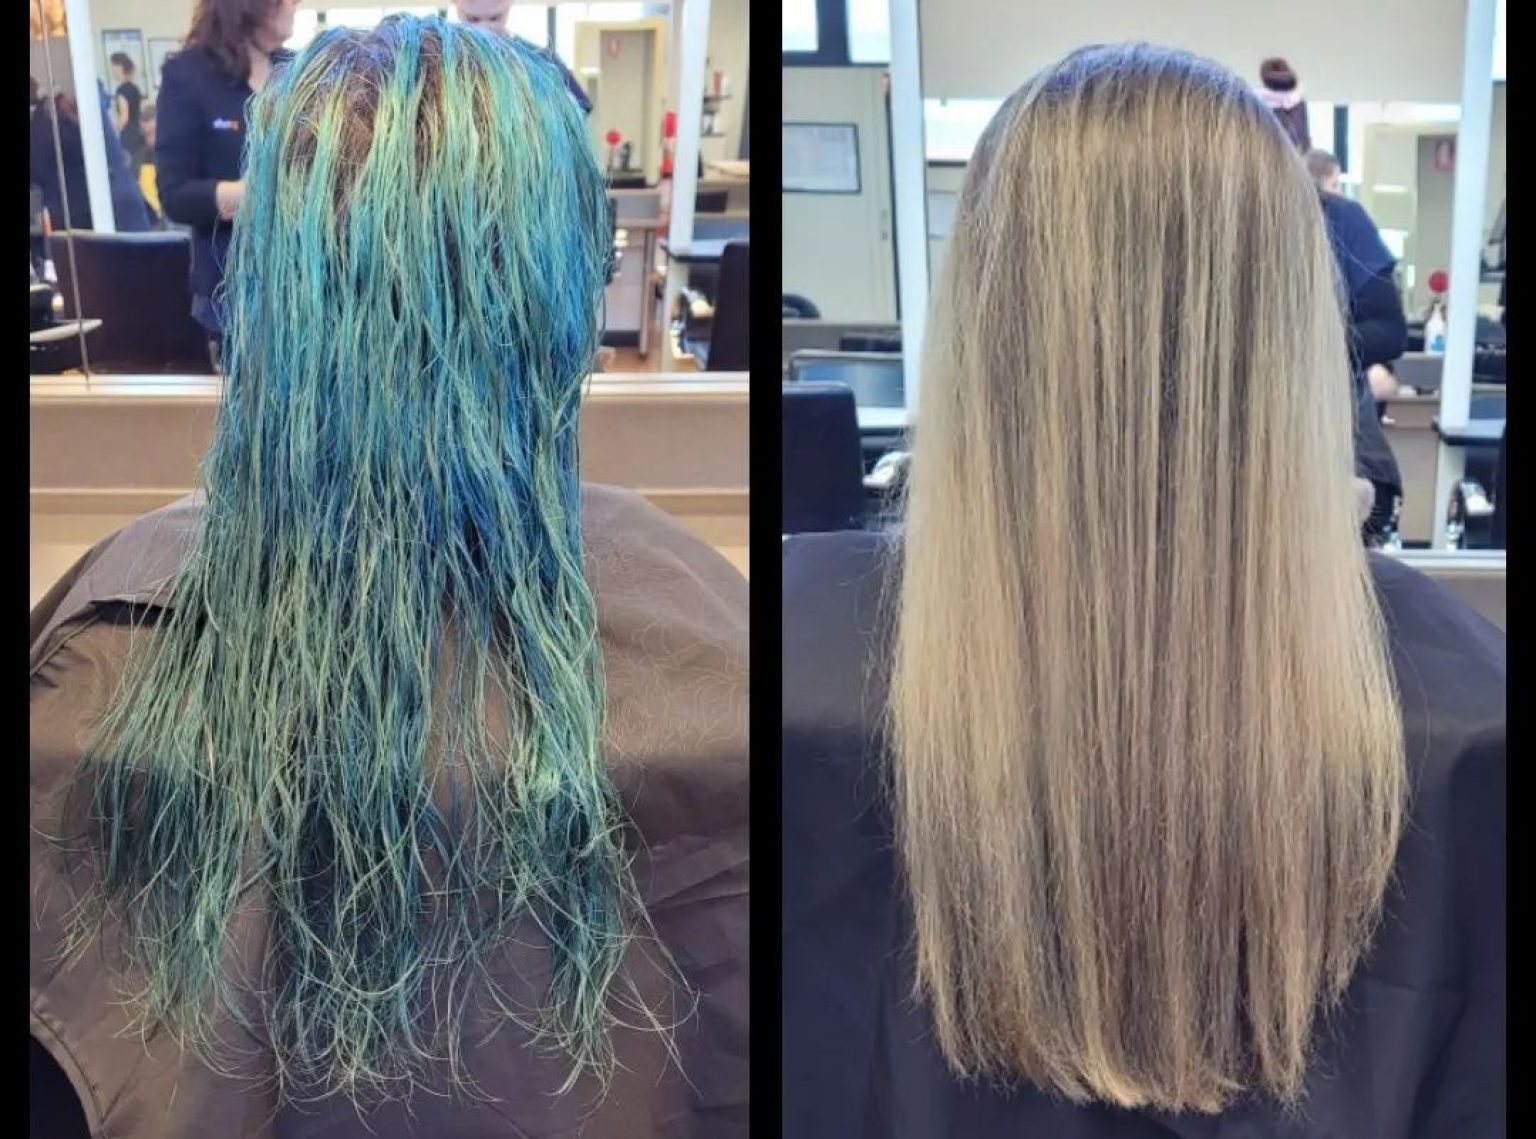 7. How to Remove Blue Hair Dye - wide 8